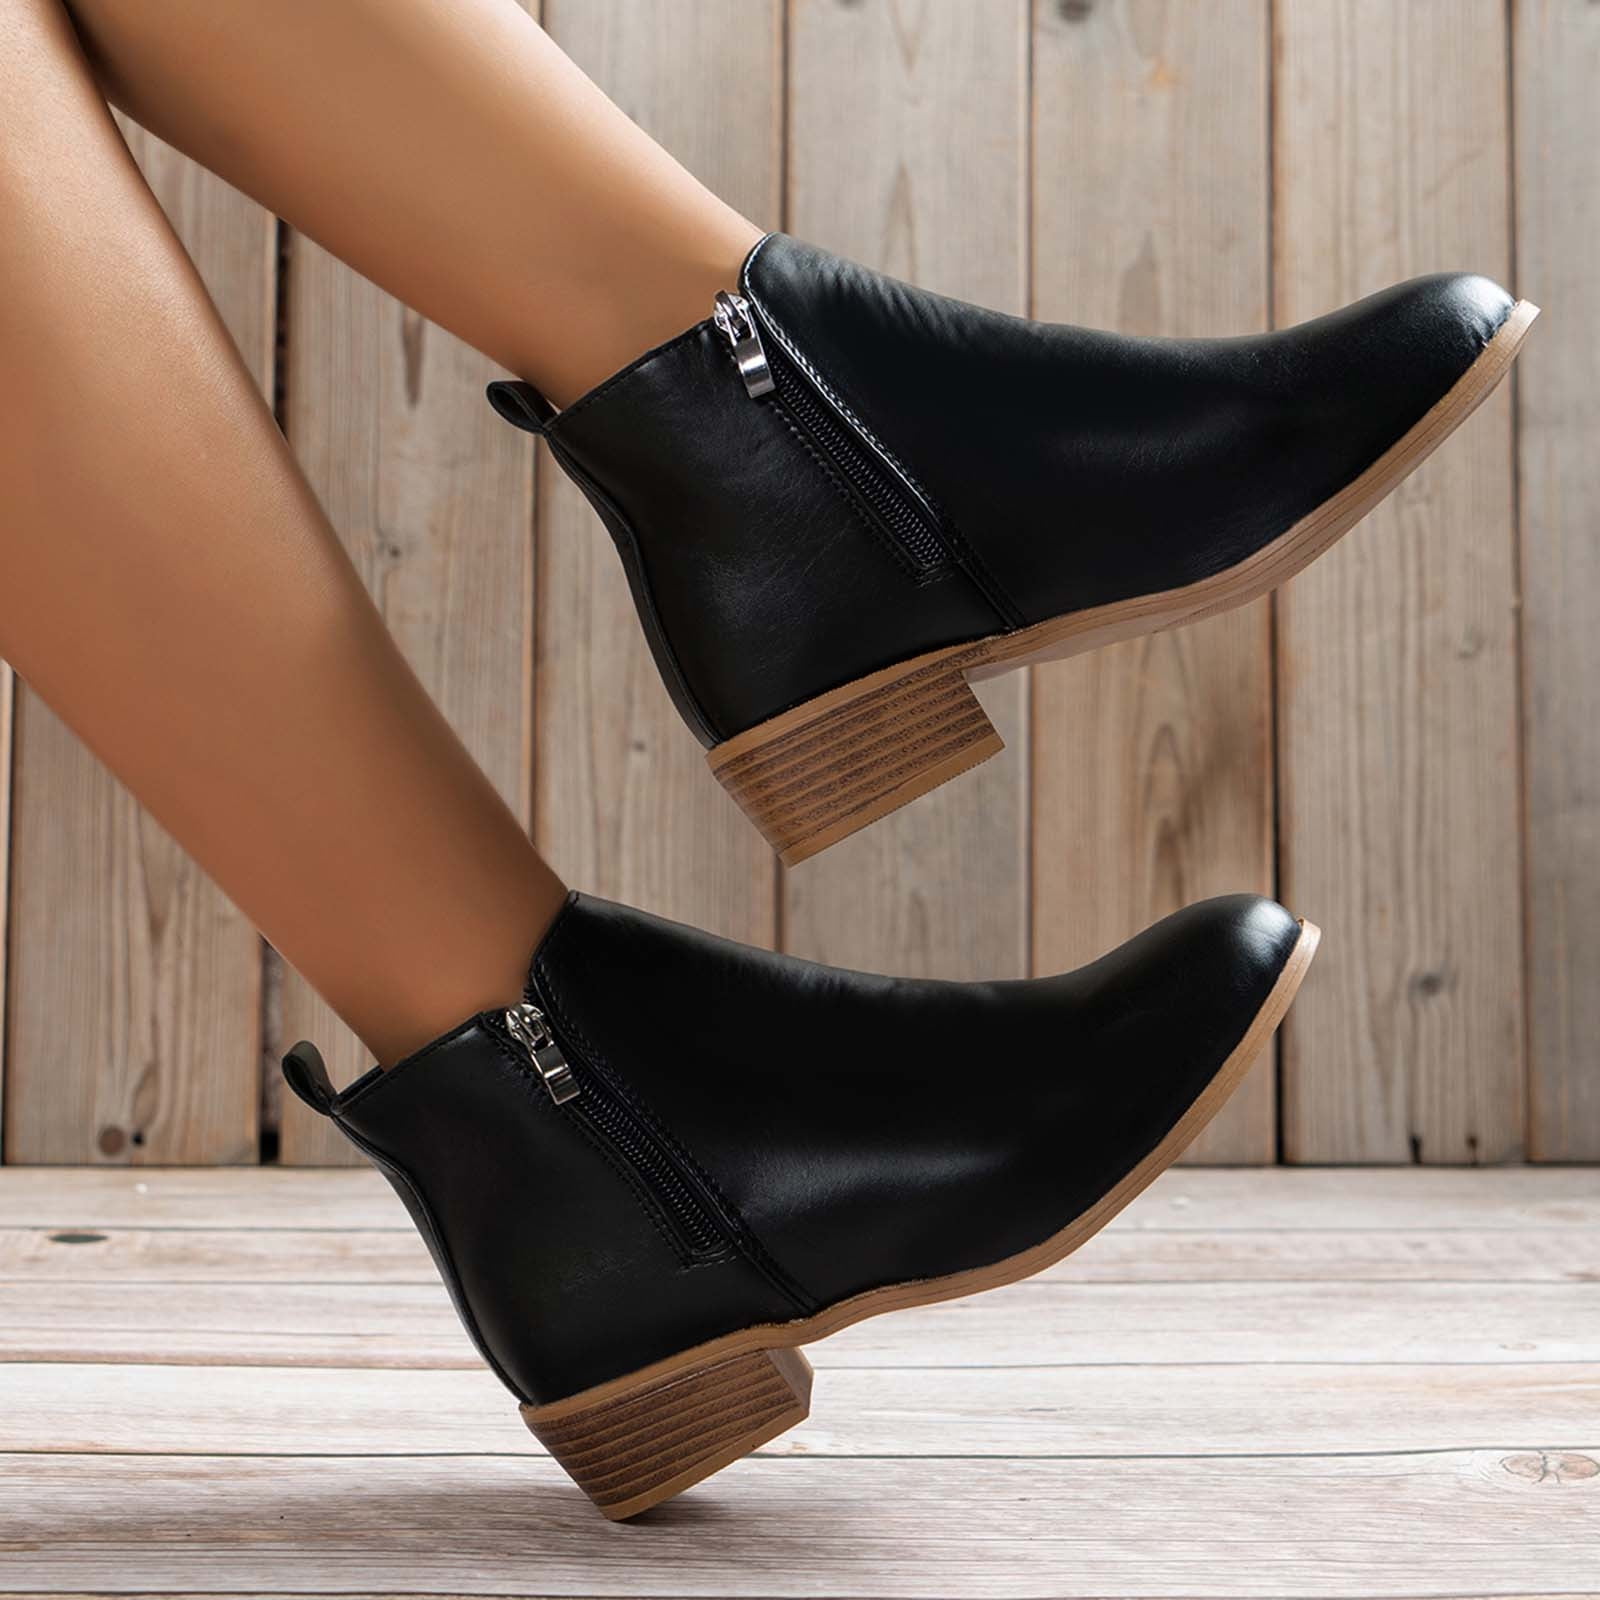 Gibobby Ankle Boots for Women Low Heel,Summer Caged Macao